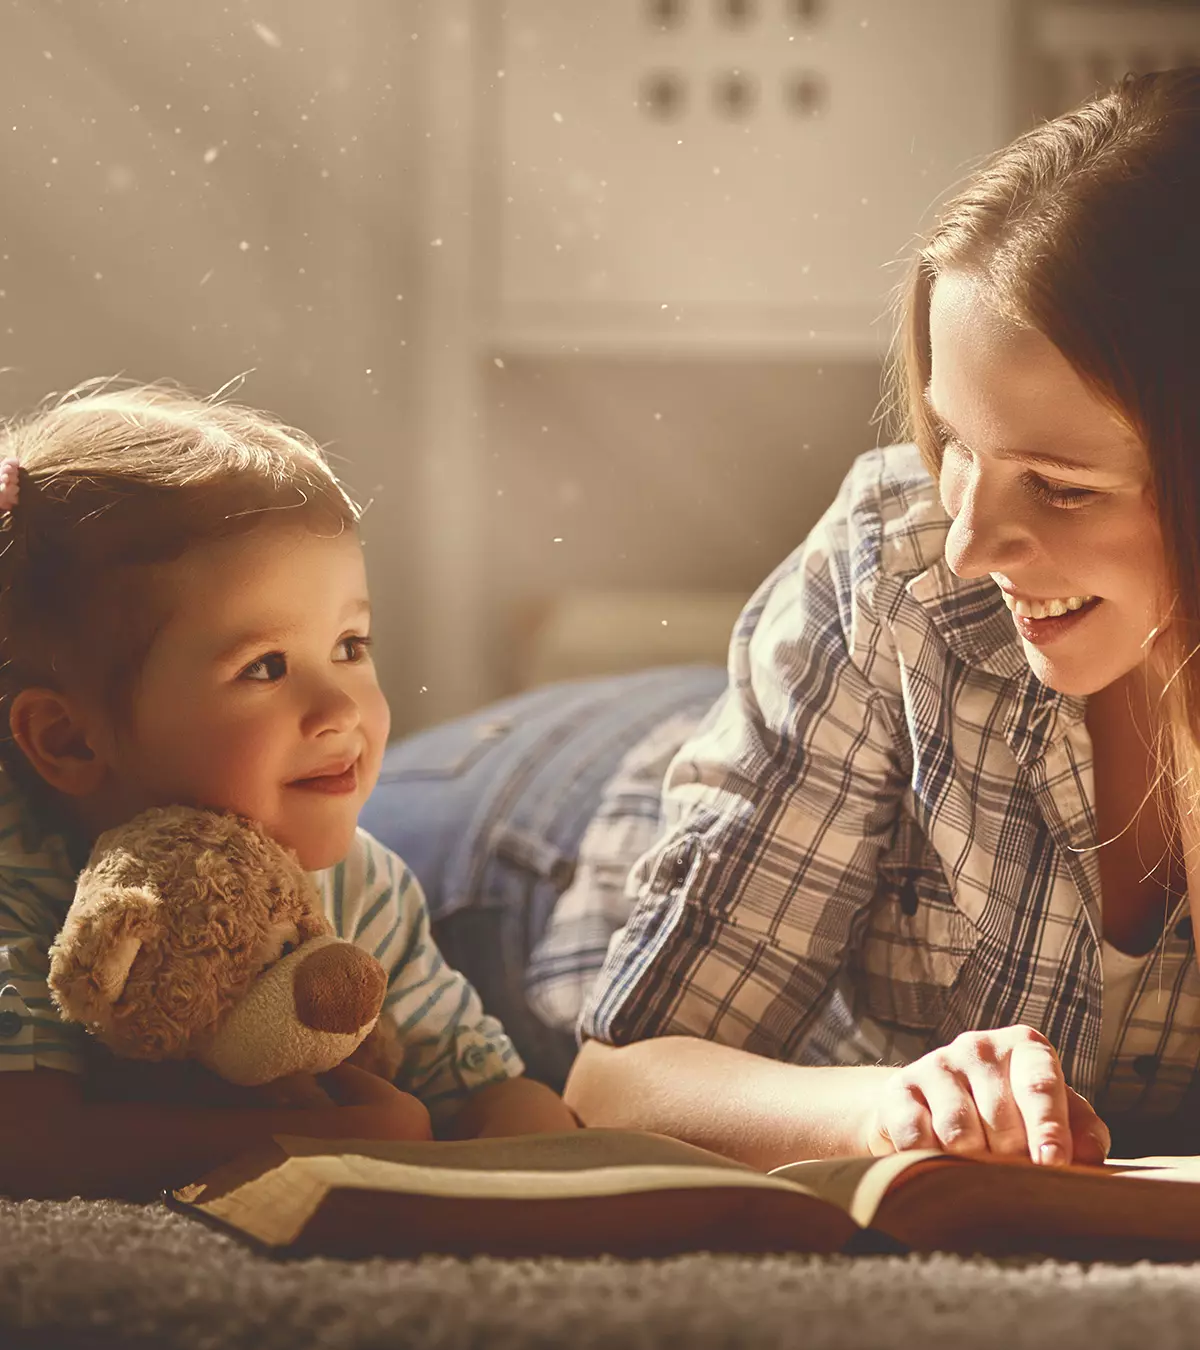 45 Inspirational And Short Poems About Mother And Daughter